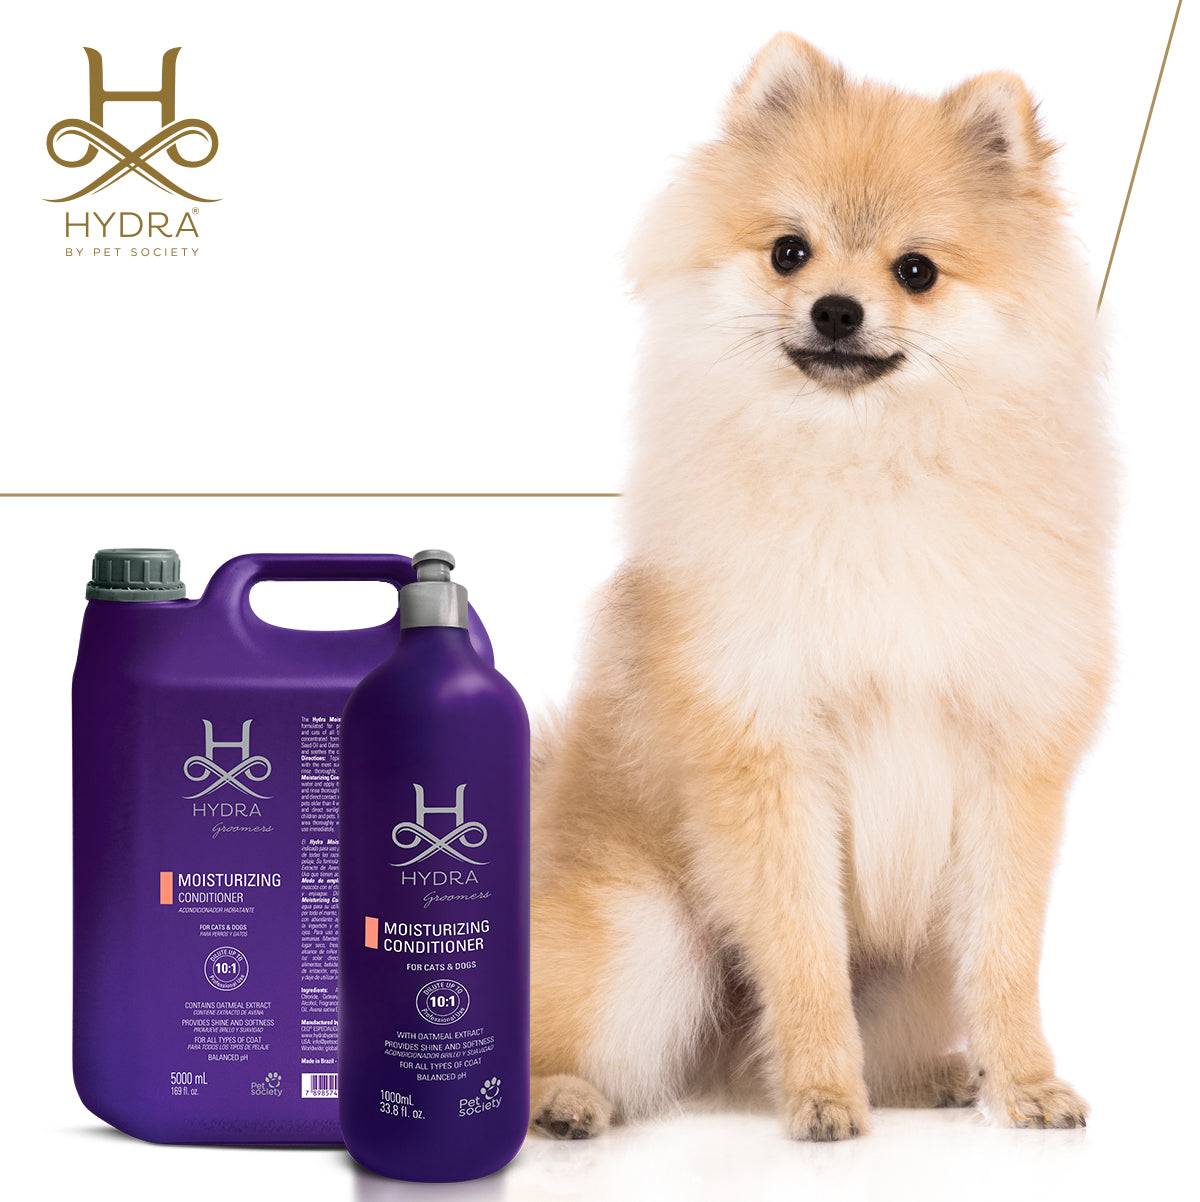 Hydra Groomers Ultra Dematting Spray for dogs and cats ,5 liter